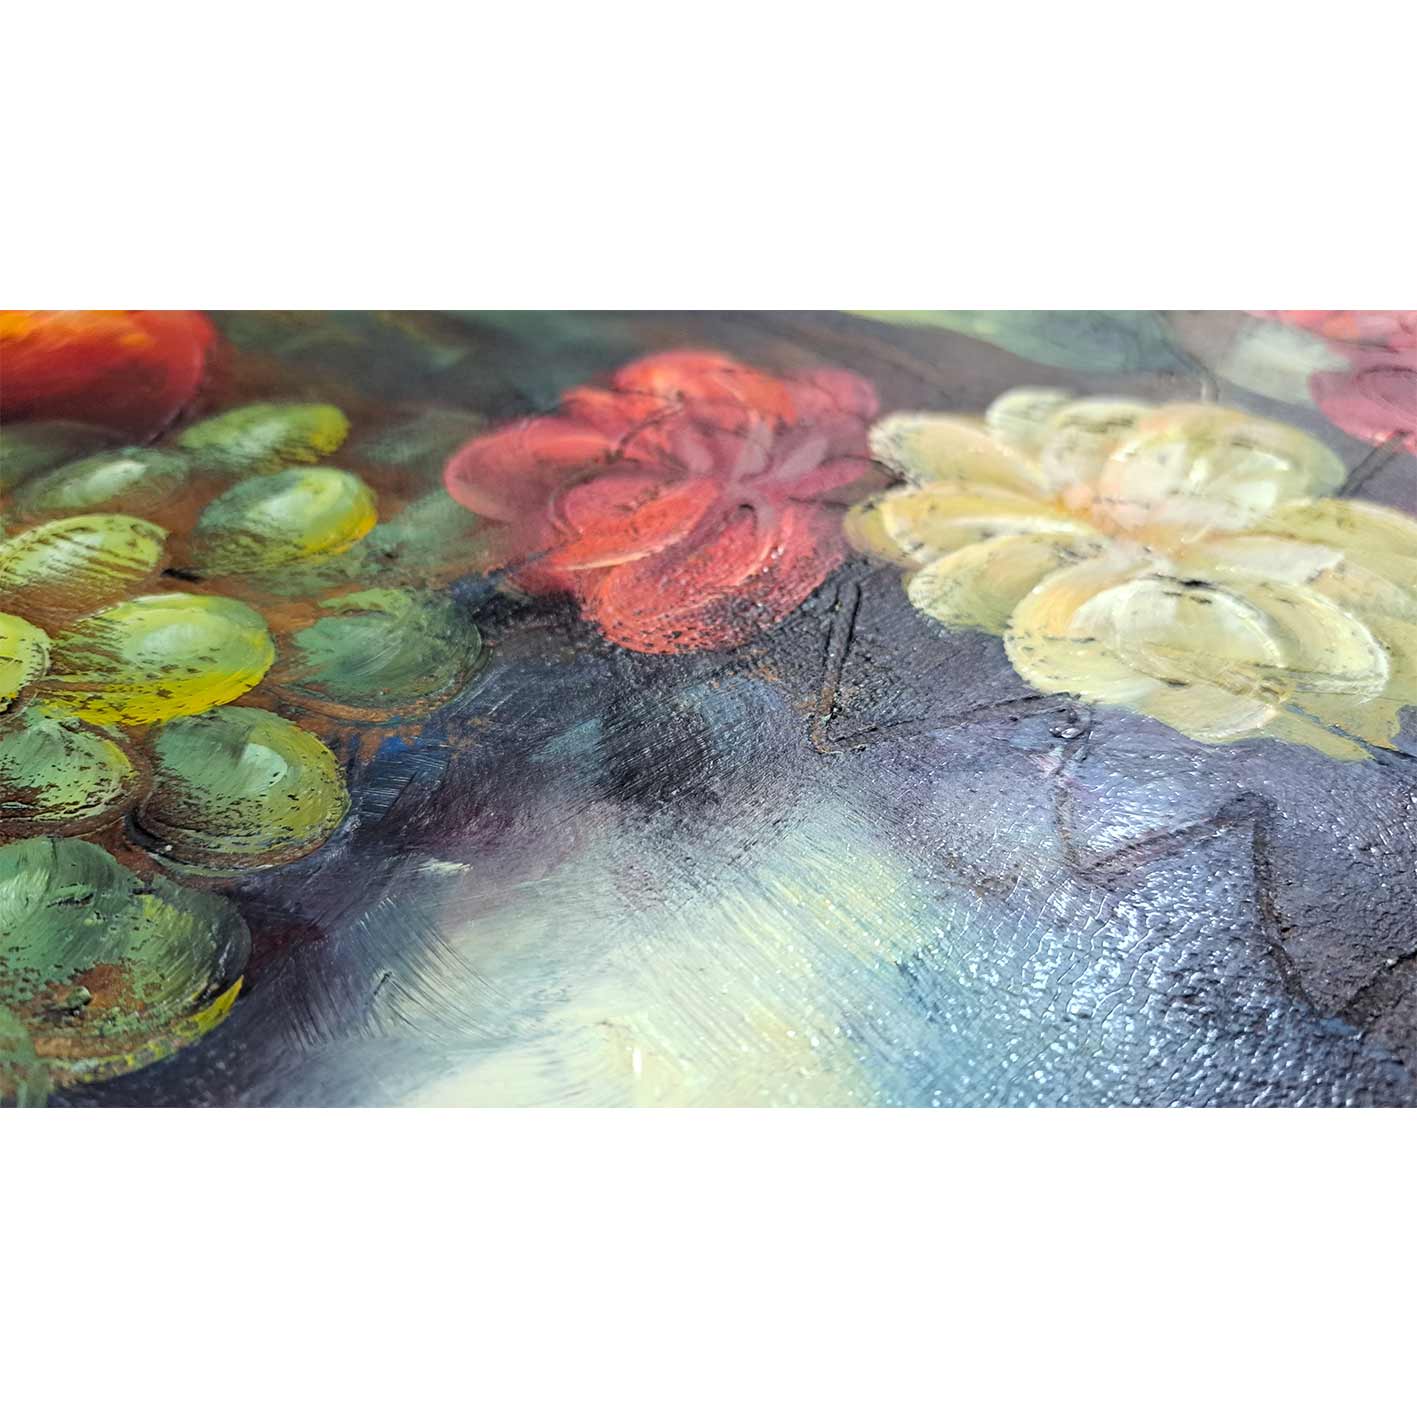 Floral Still Life Diptych Painting 60x50 cm [2 pieces]